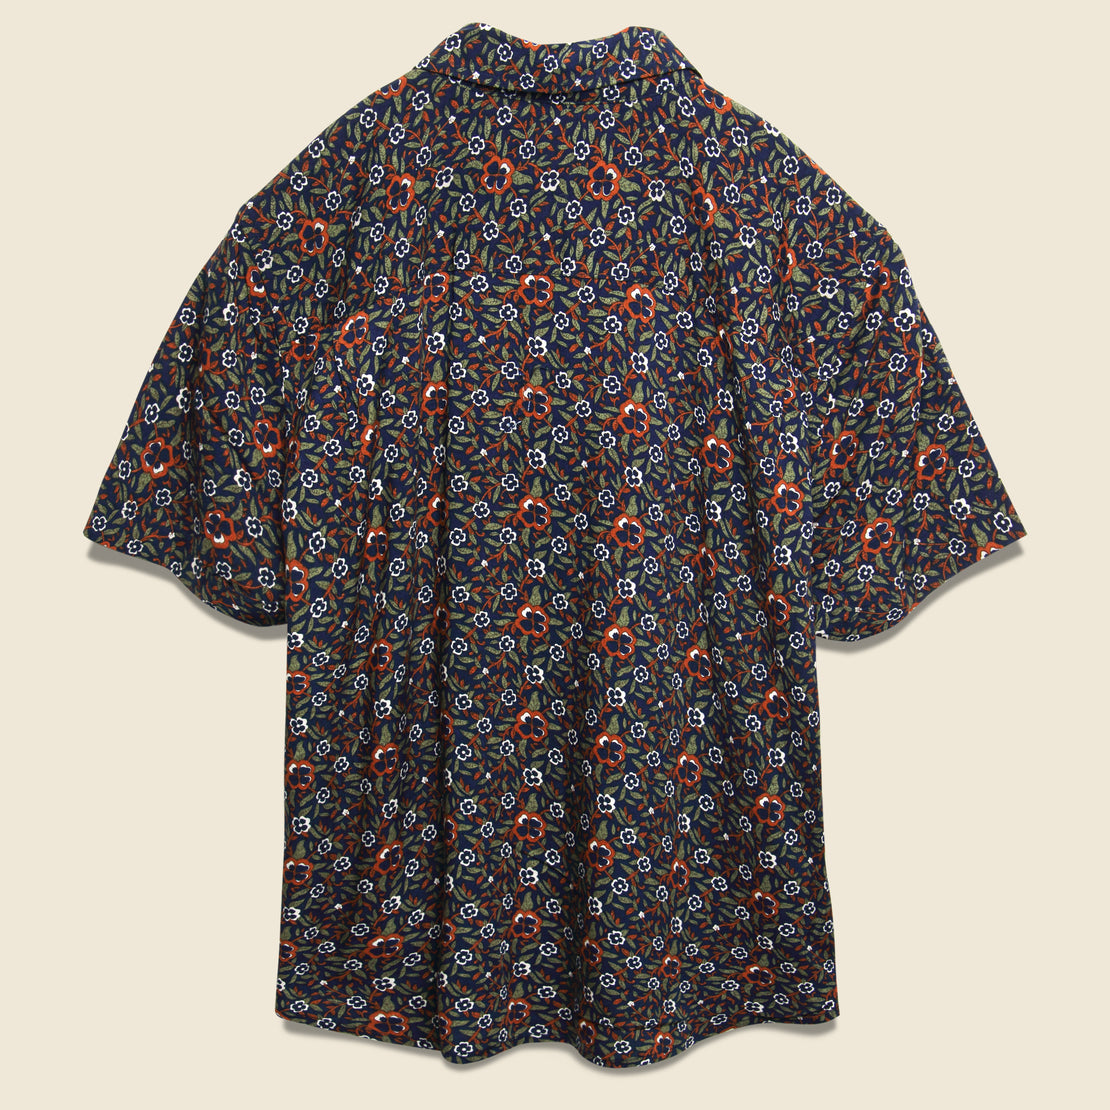 Greer Shirt - Dark Floral - Bridge & Burn - STAG Provisions - W - Tops - S/S Woven